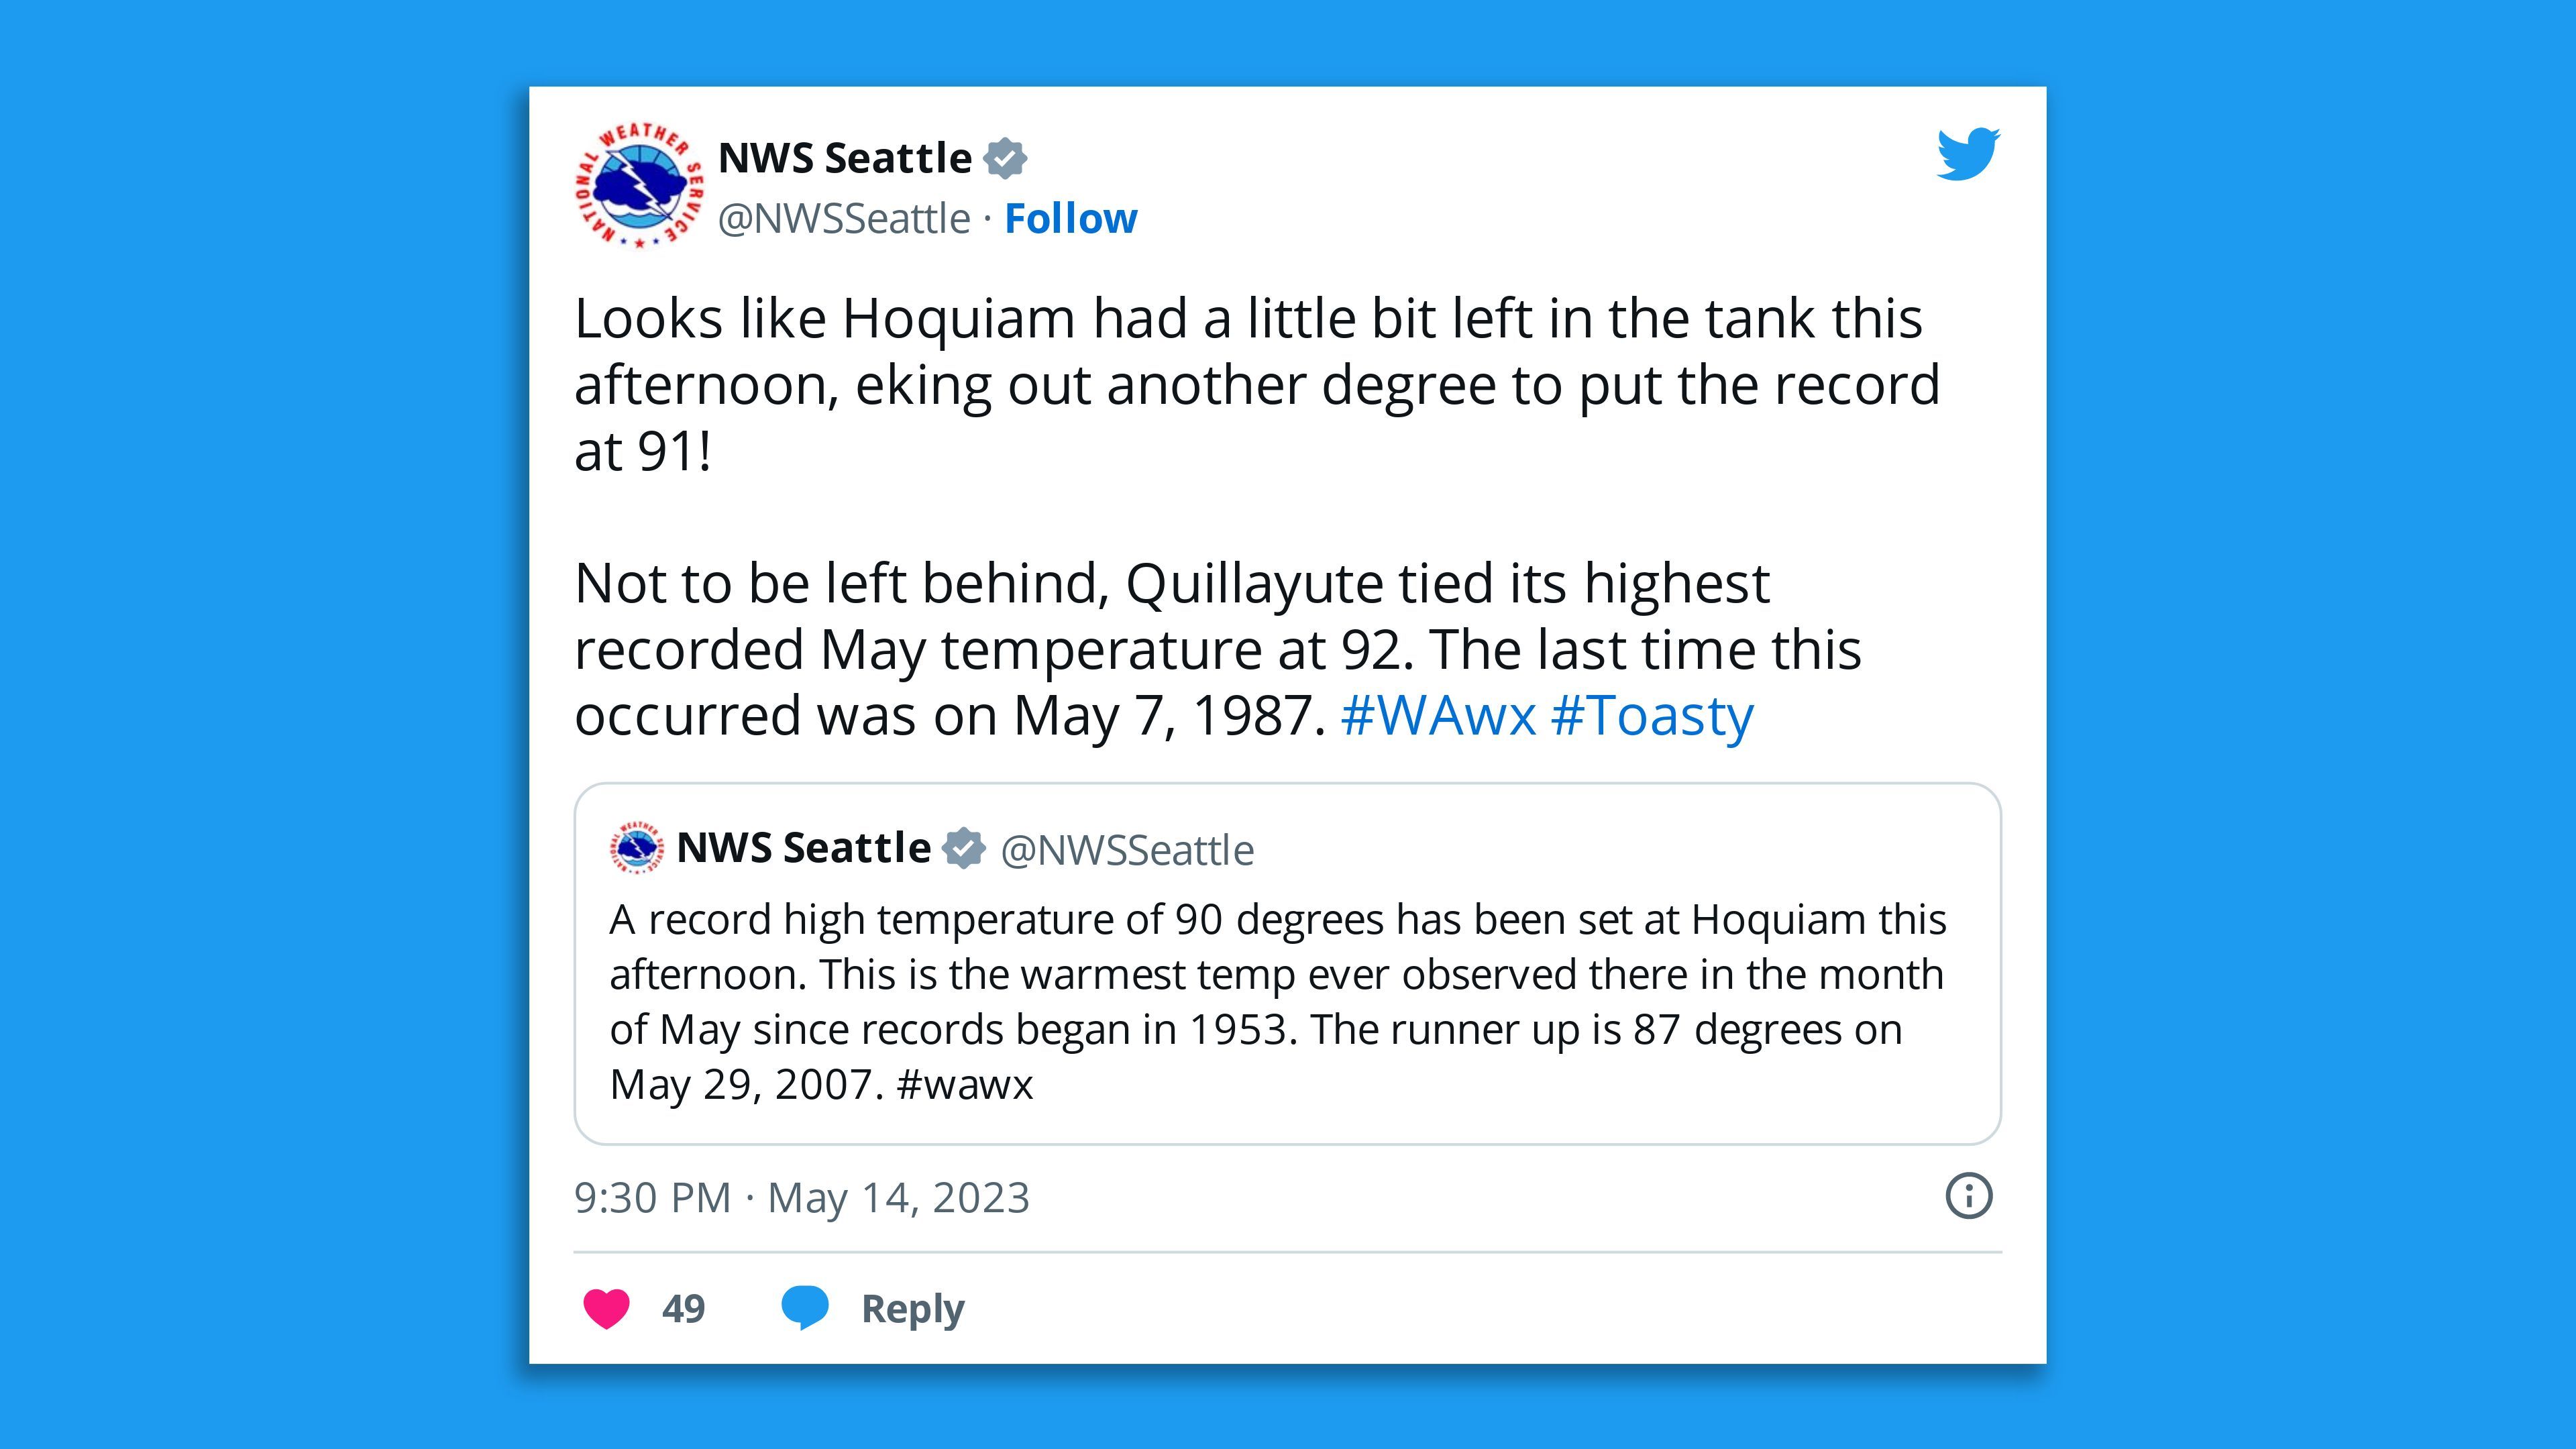 A screenshot of an NWS Seattle tweet saying: "Looks like Hoquiam had a little bit left in the tank this afternoon, eking out another degree to put the record at 91!  Not to be left behind, Quillayute tied its highest recorded May temperature at 92. The last time this occurred was on May 7, 1987. "